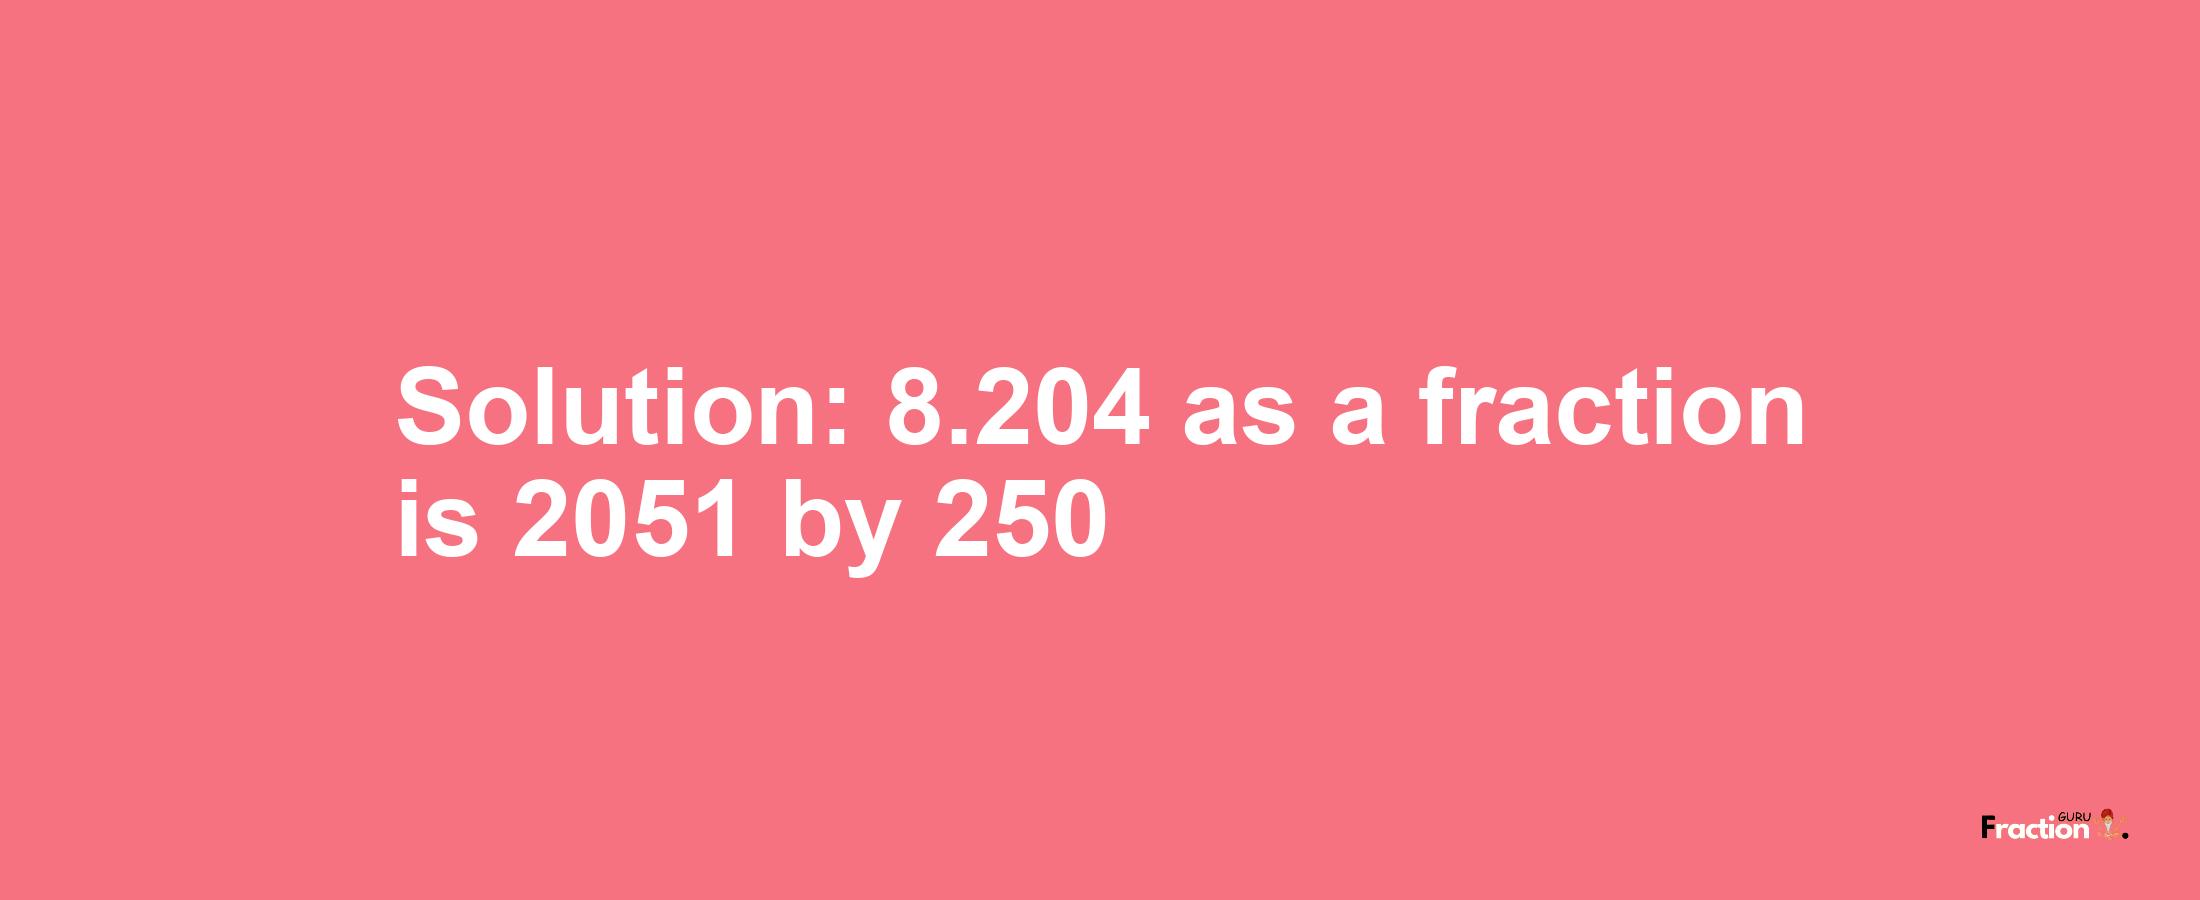 Solution:8.204 as a fraction is 2051/250